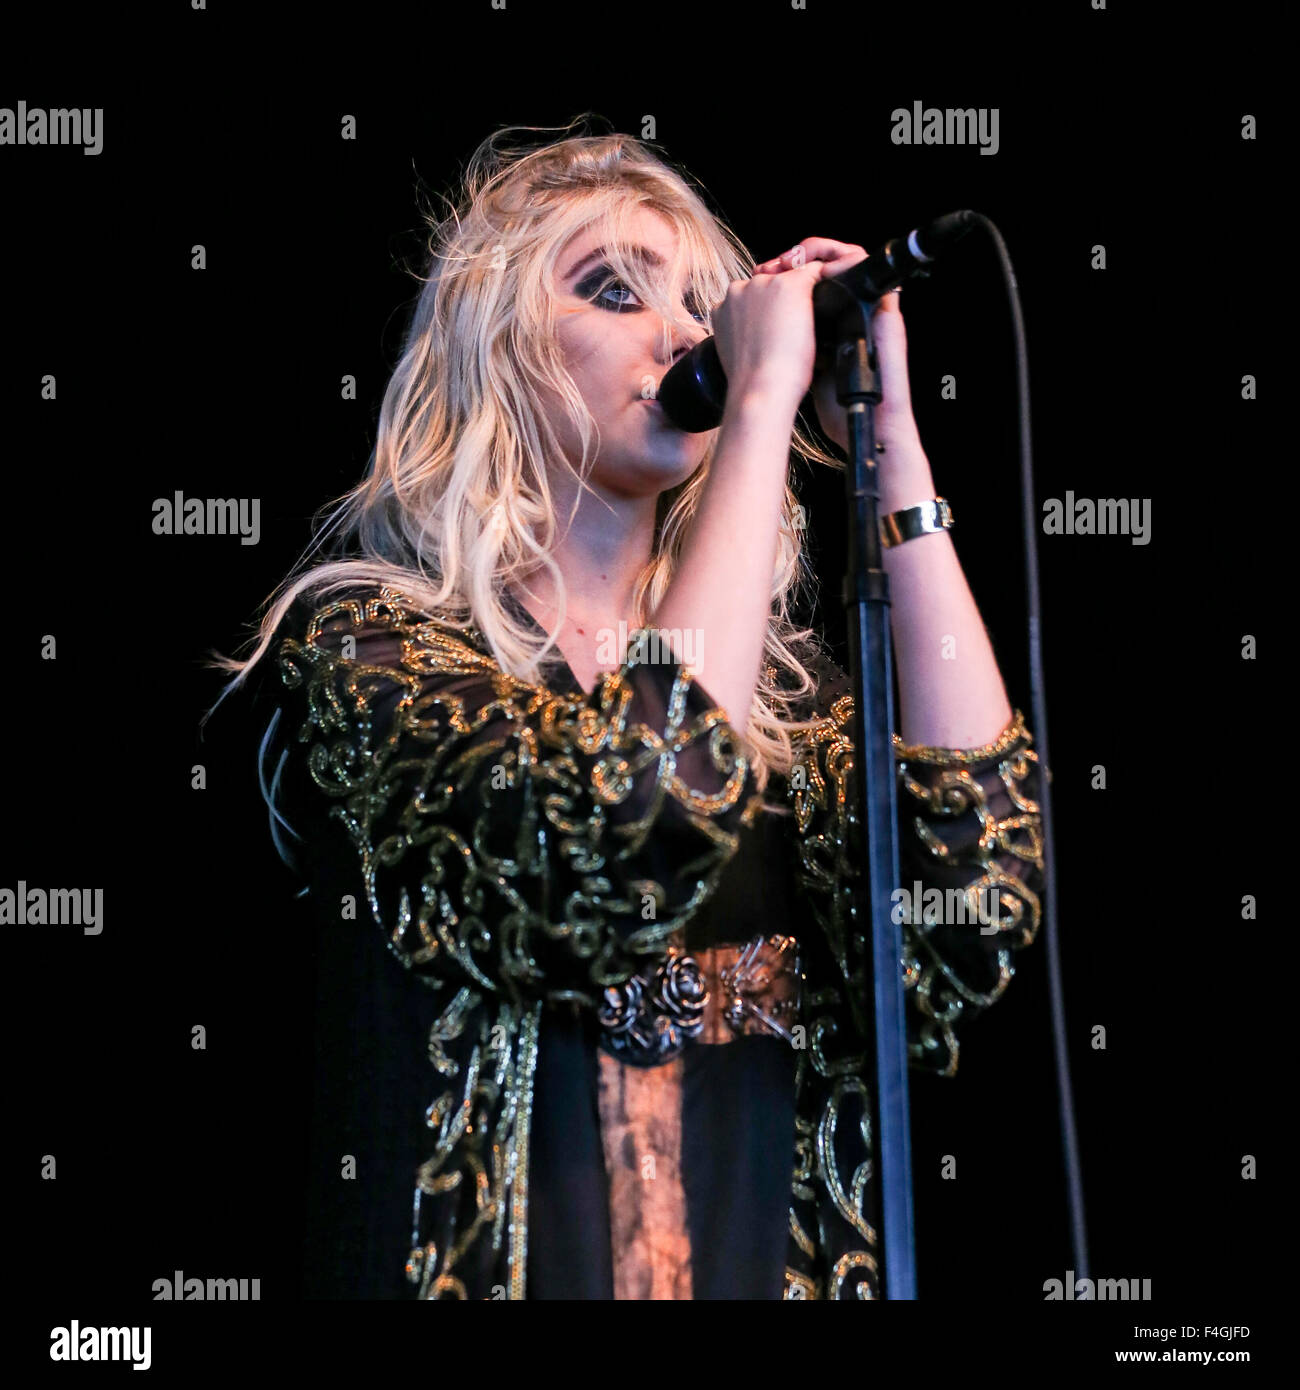 The Pretty Reckless performs live on tour.   The Pretty Reckless is an American rock band from New York City. The current members are Taylor Momsen (lead vocals, rhythm guitar), Ben Phillips (lead guitar, backing vocals), Mark Damon (bass) and Jamie Perkins (drums). Stock Photo